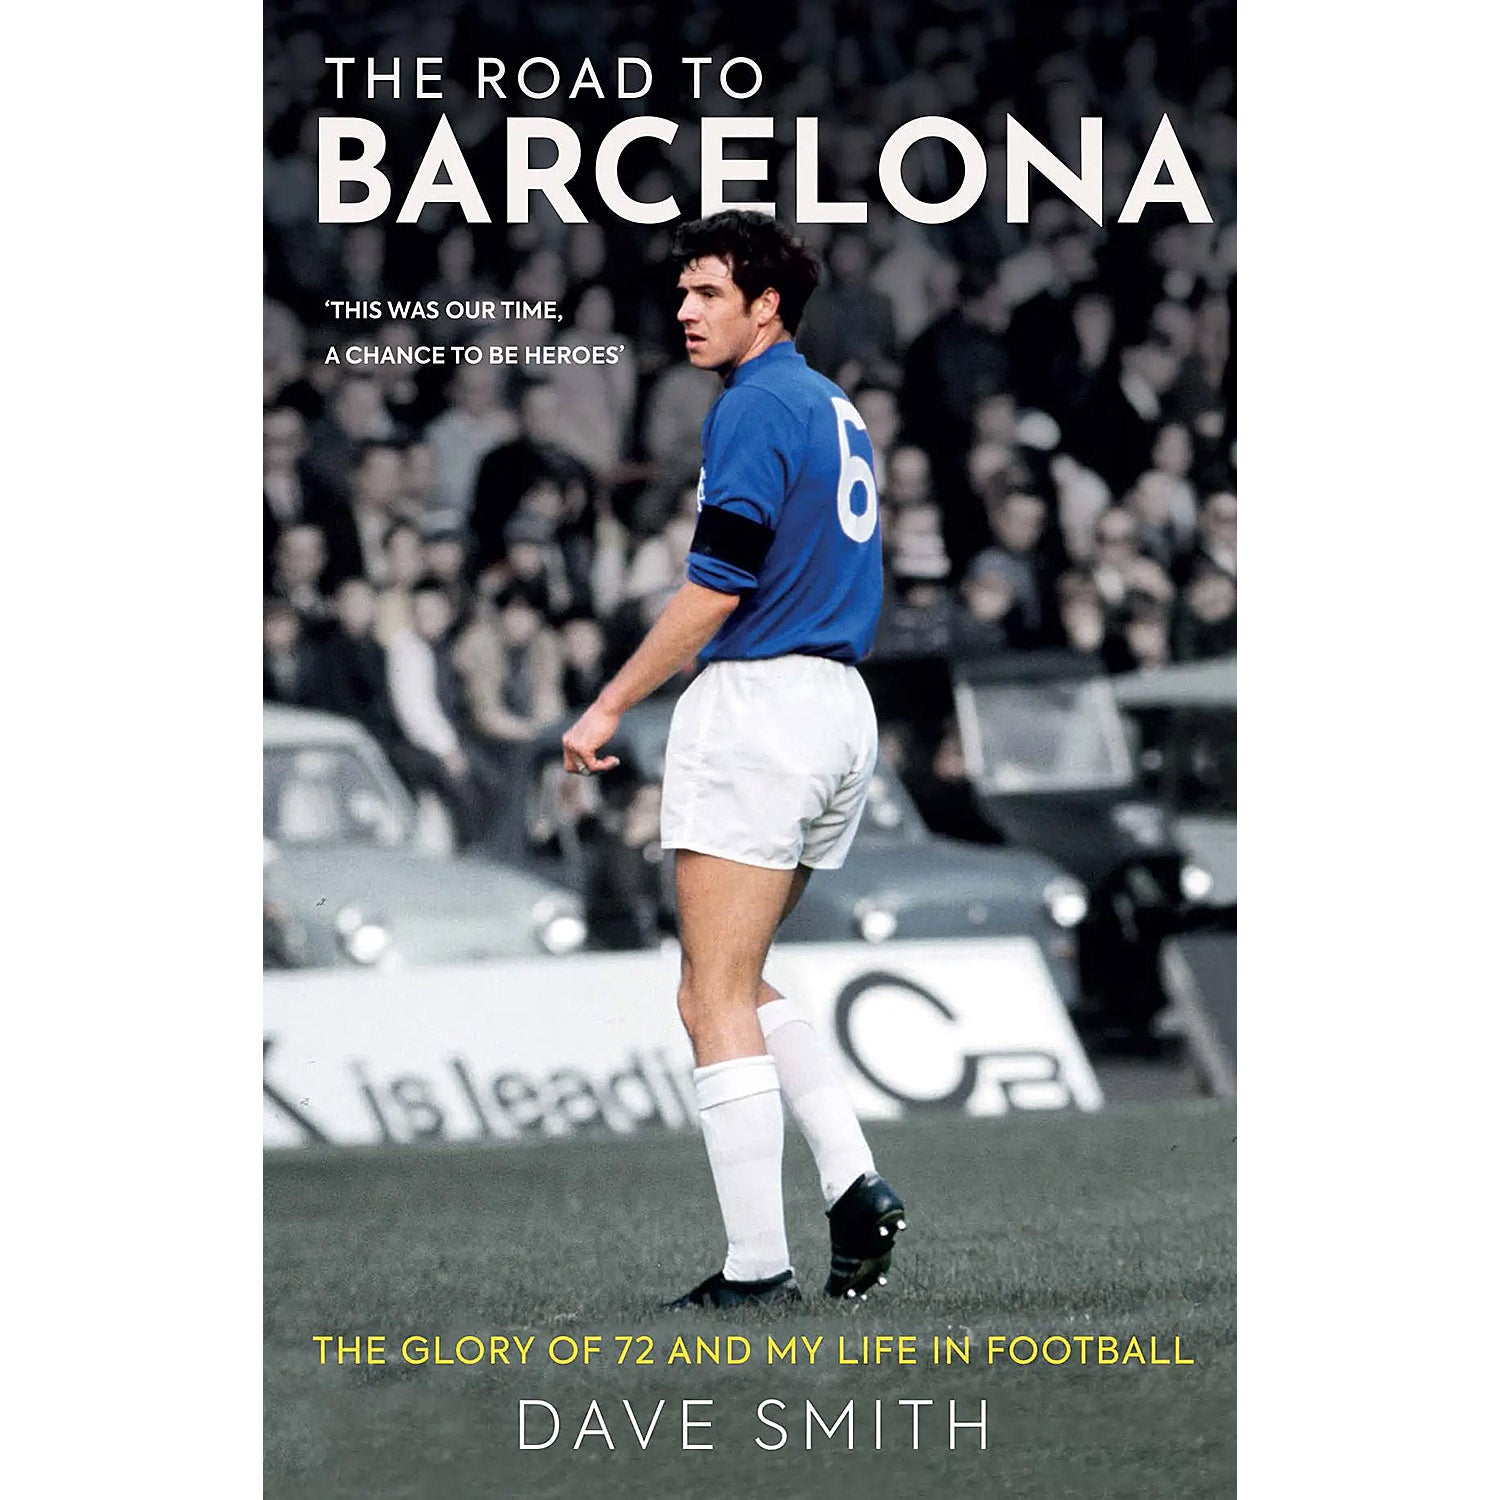 The Road to Barcelona – Dave Smith – The Glory of 72 and My Life in Football